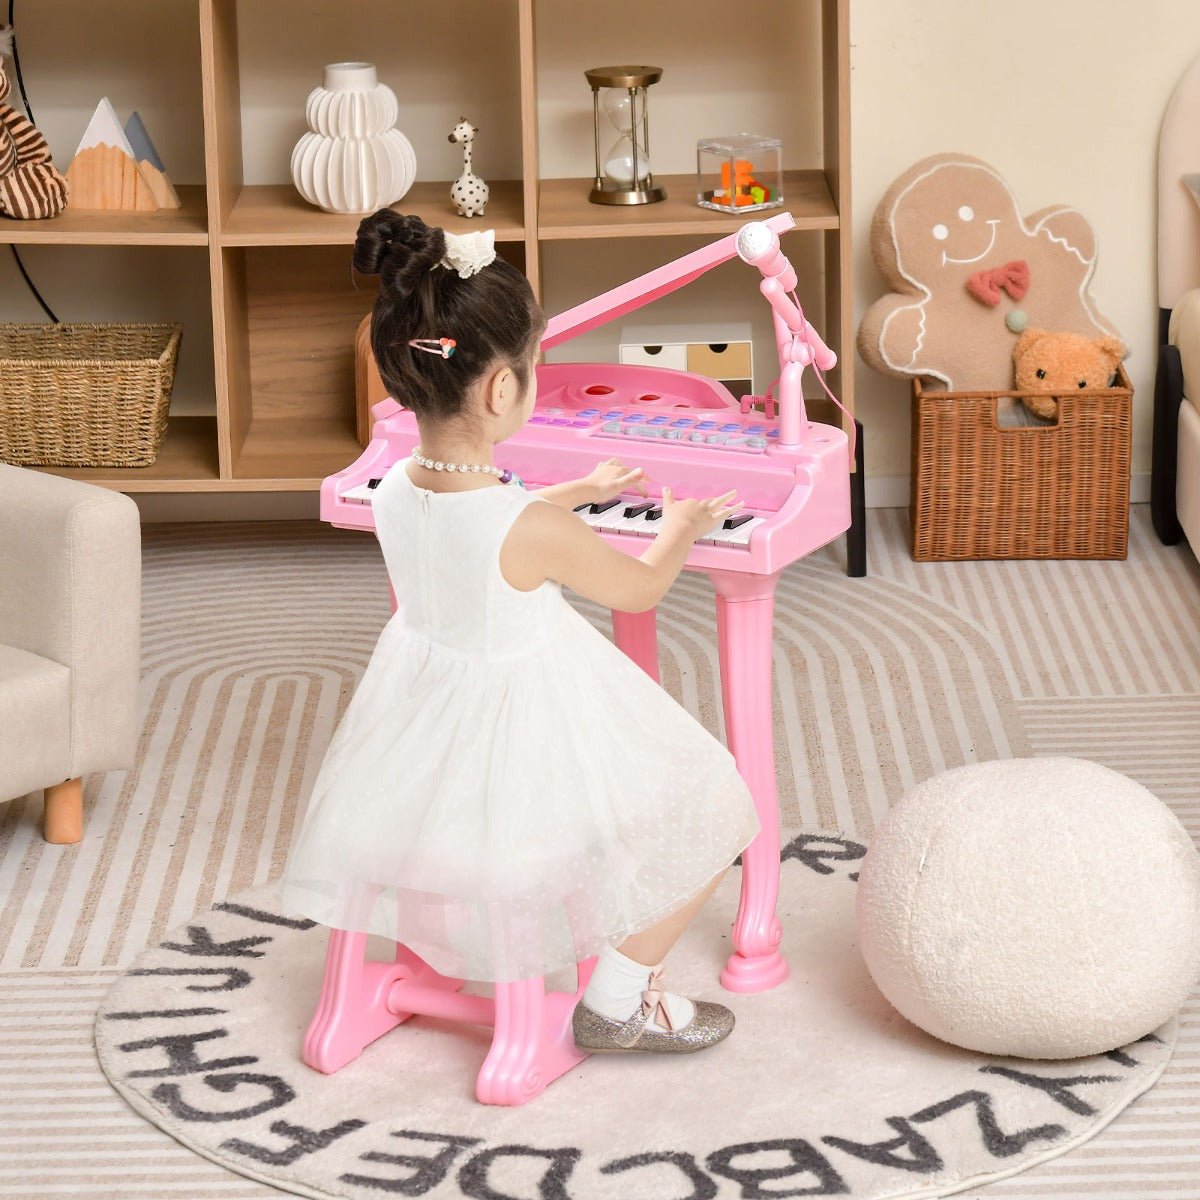 Buy the Kids Pink Piano Keyboard with Stool and Microphone at Kids Mega Mart